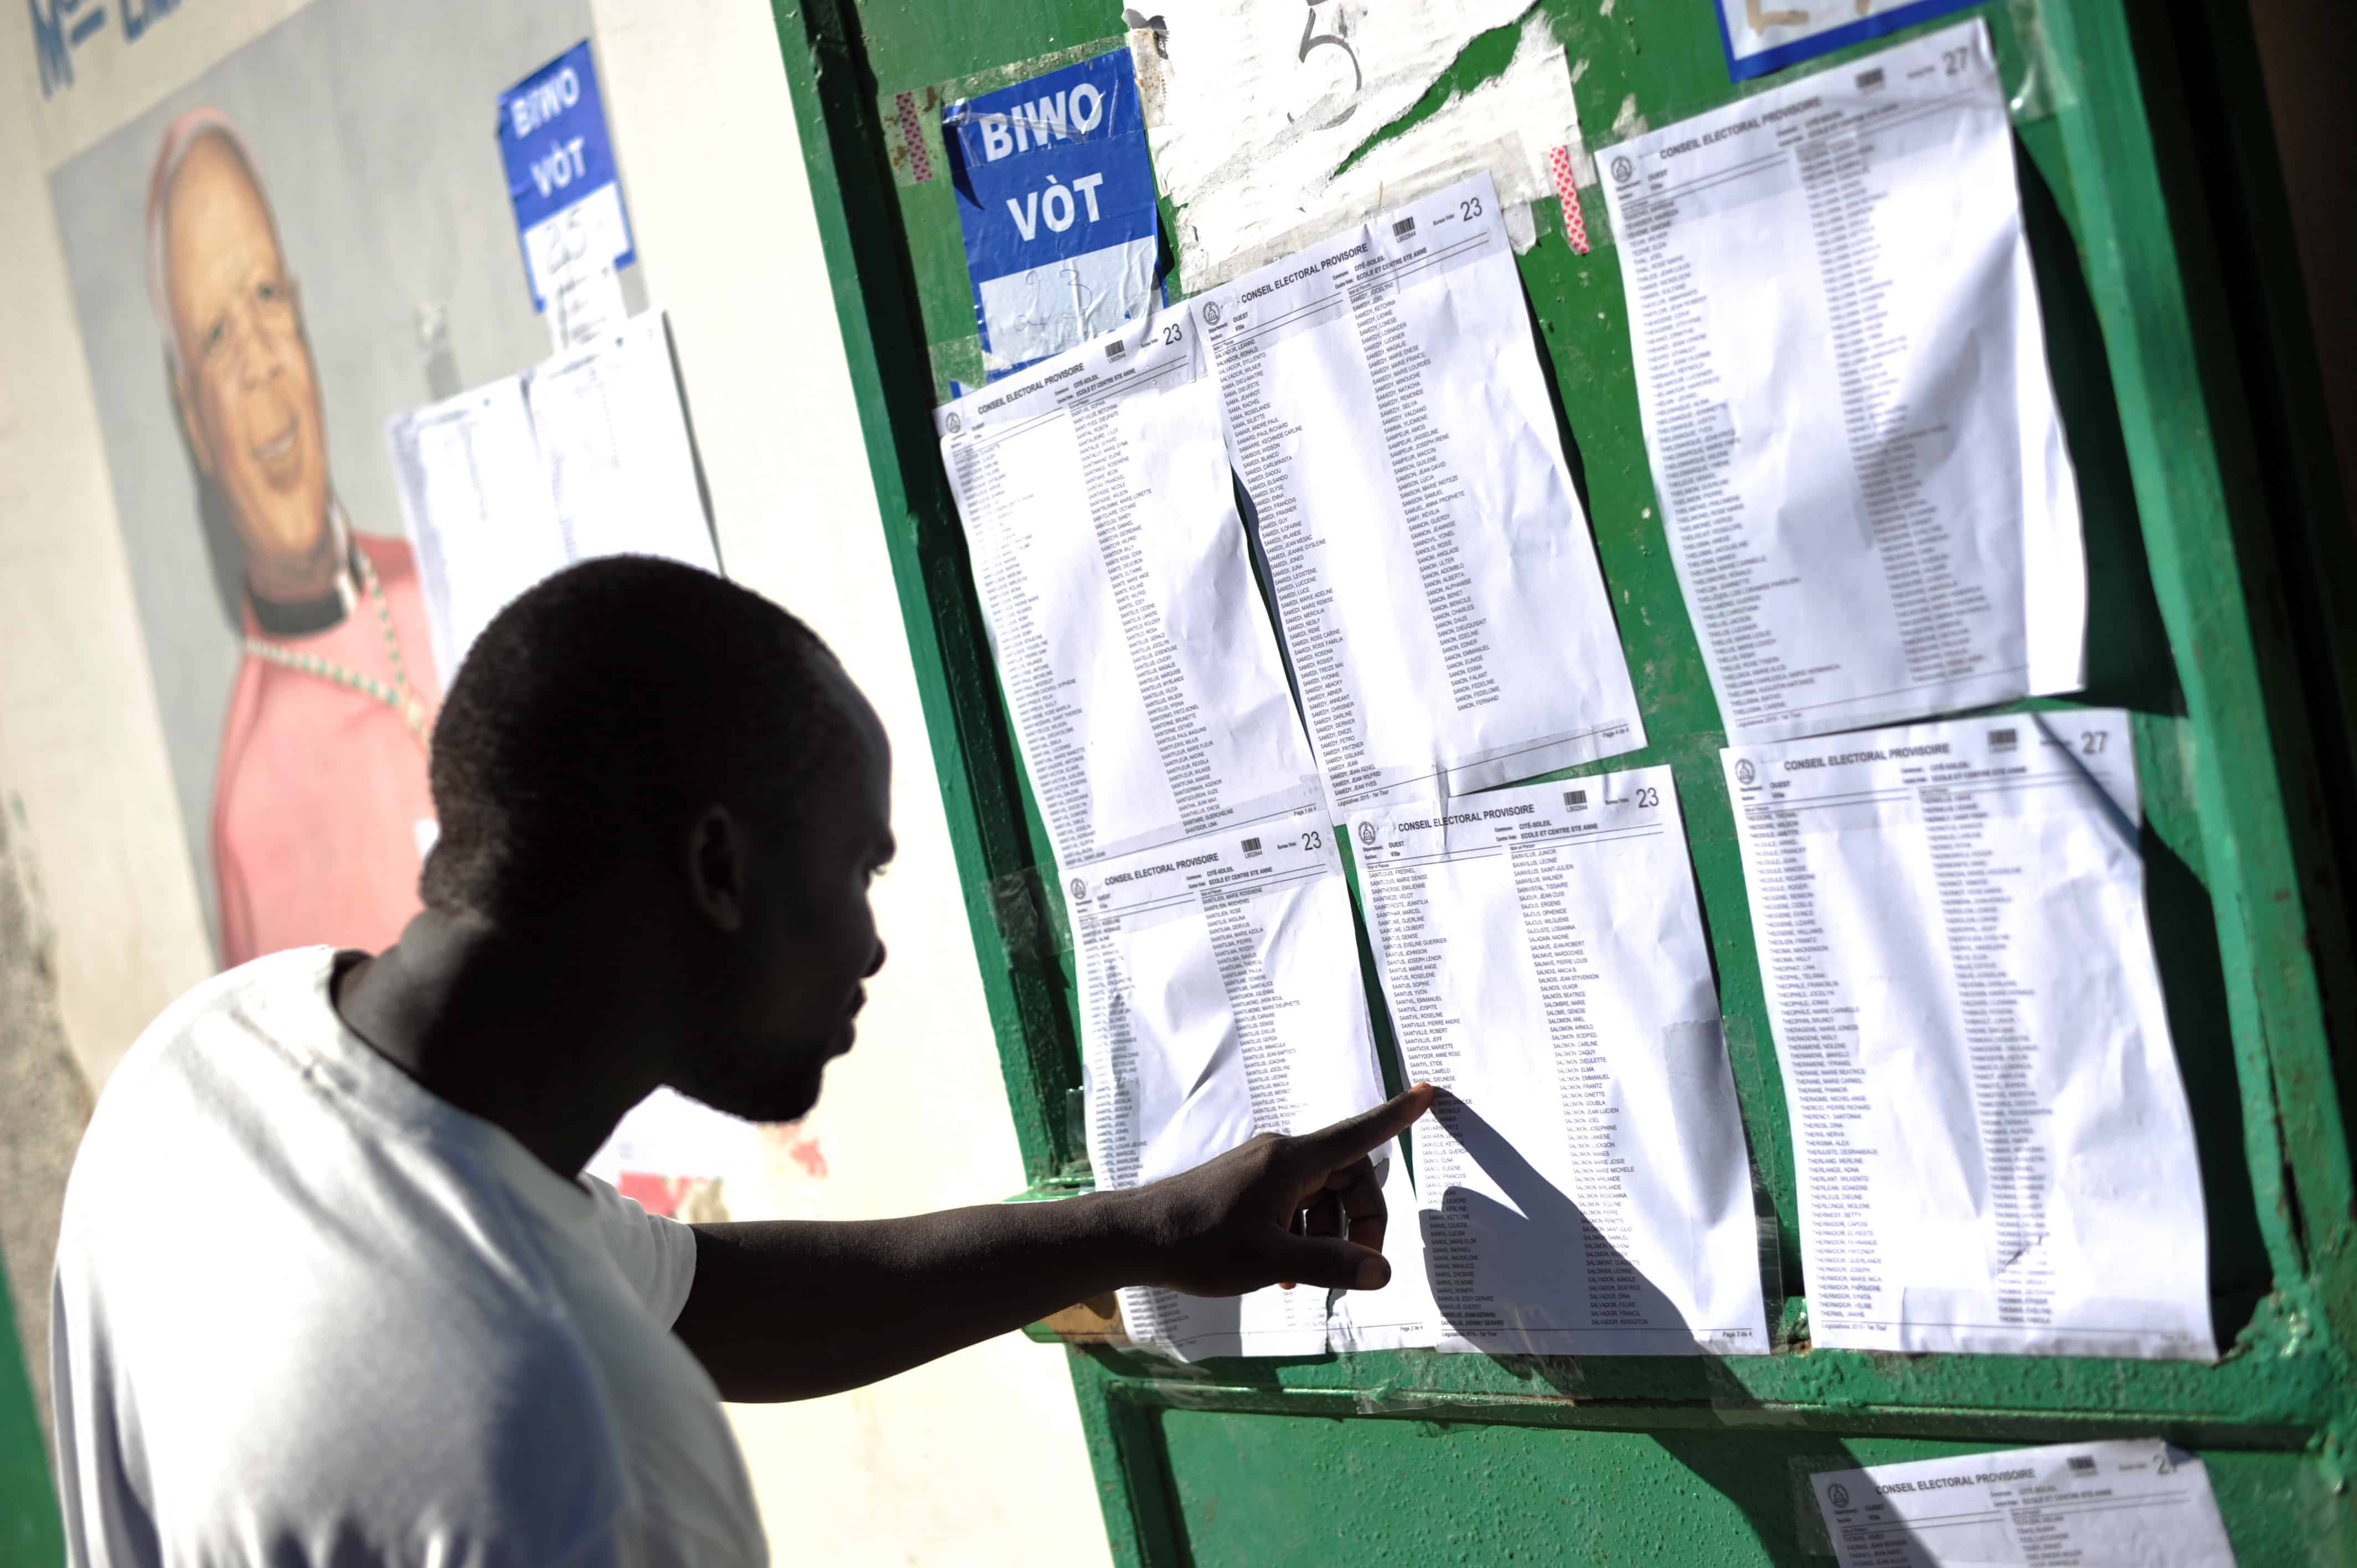 A voter checks a list at a polling station during the legislative elections in Port-au-Prince.